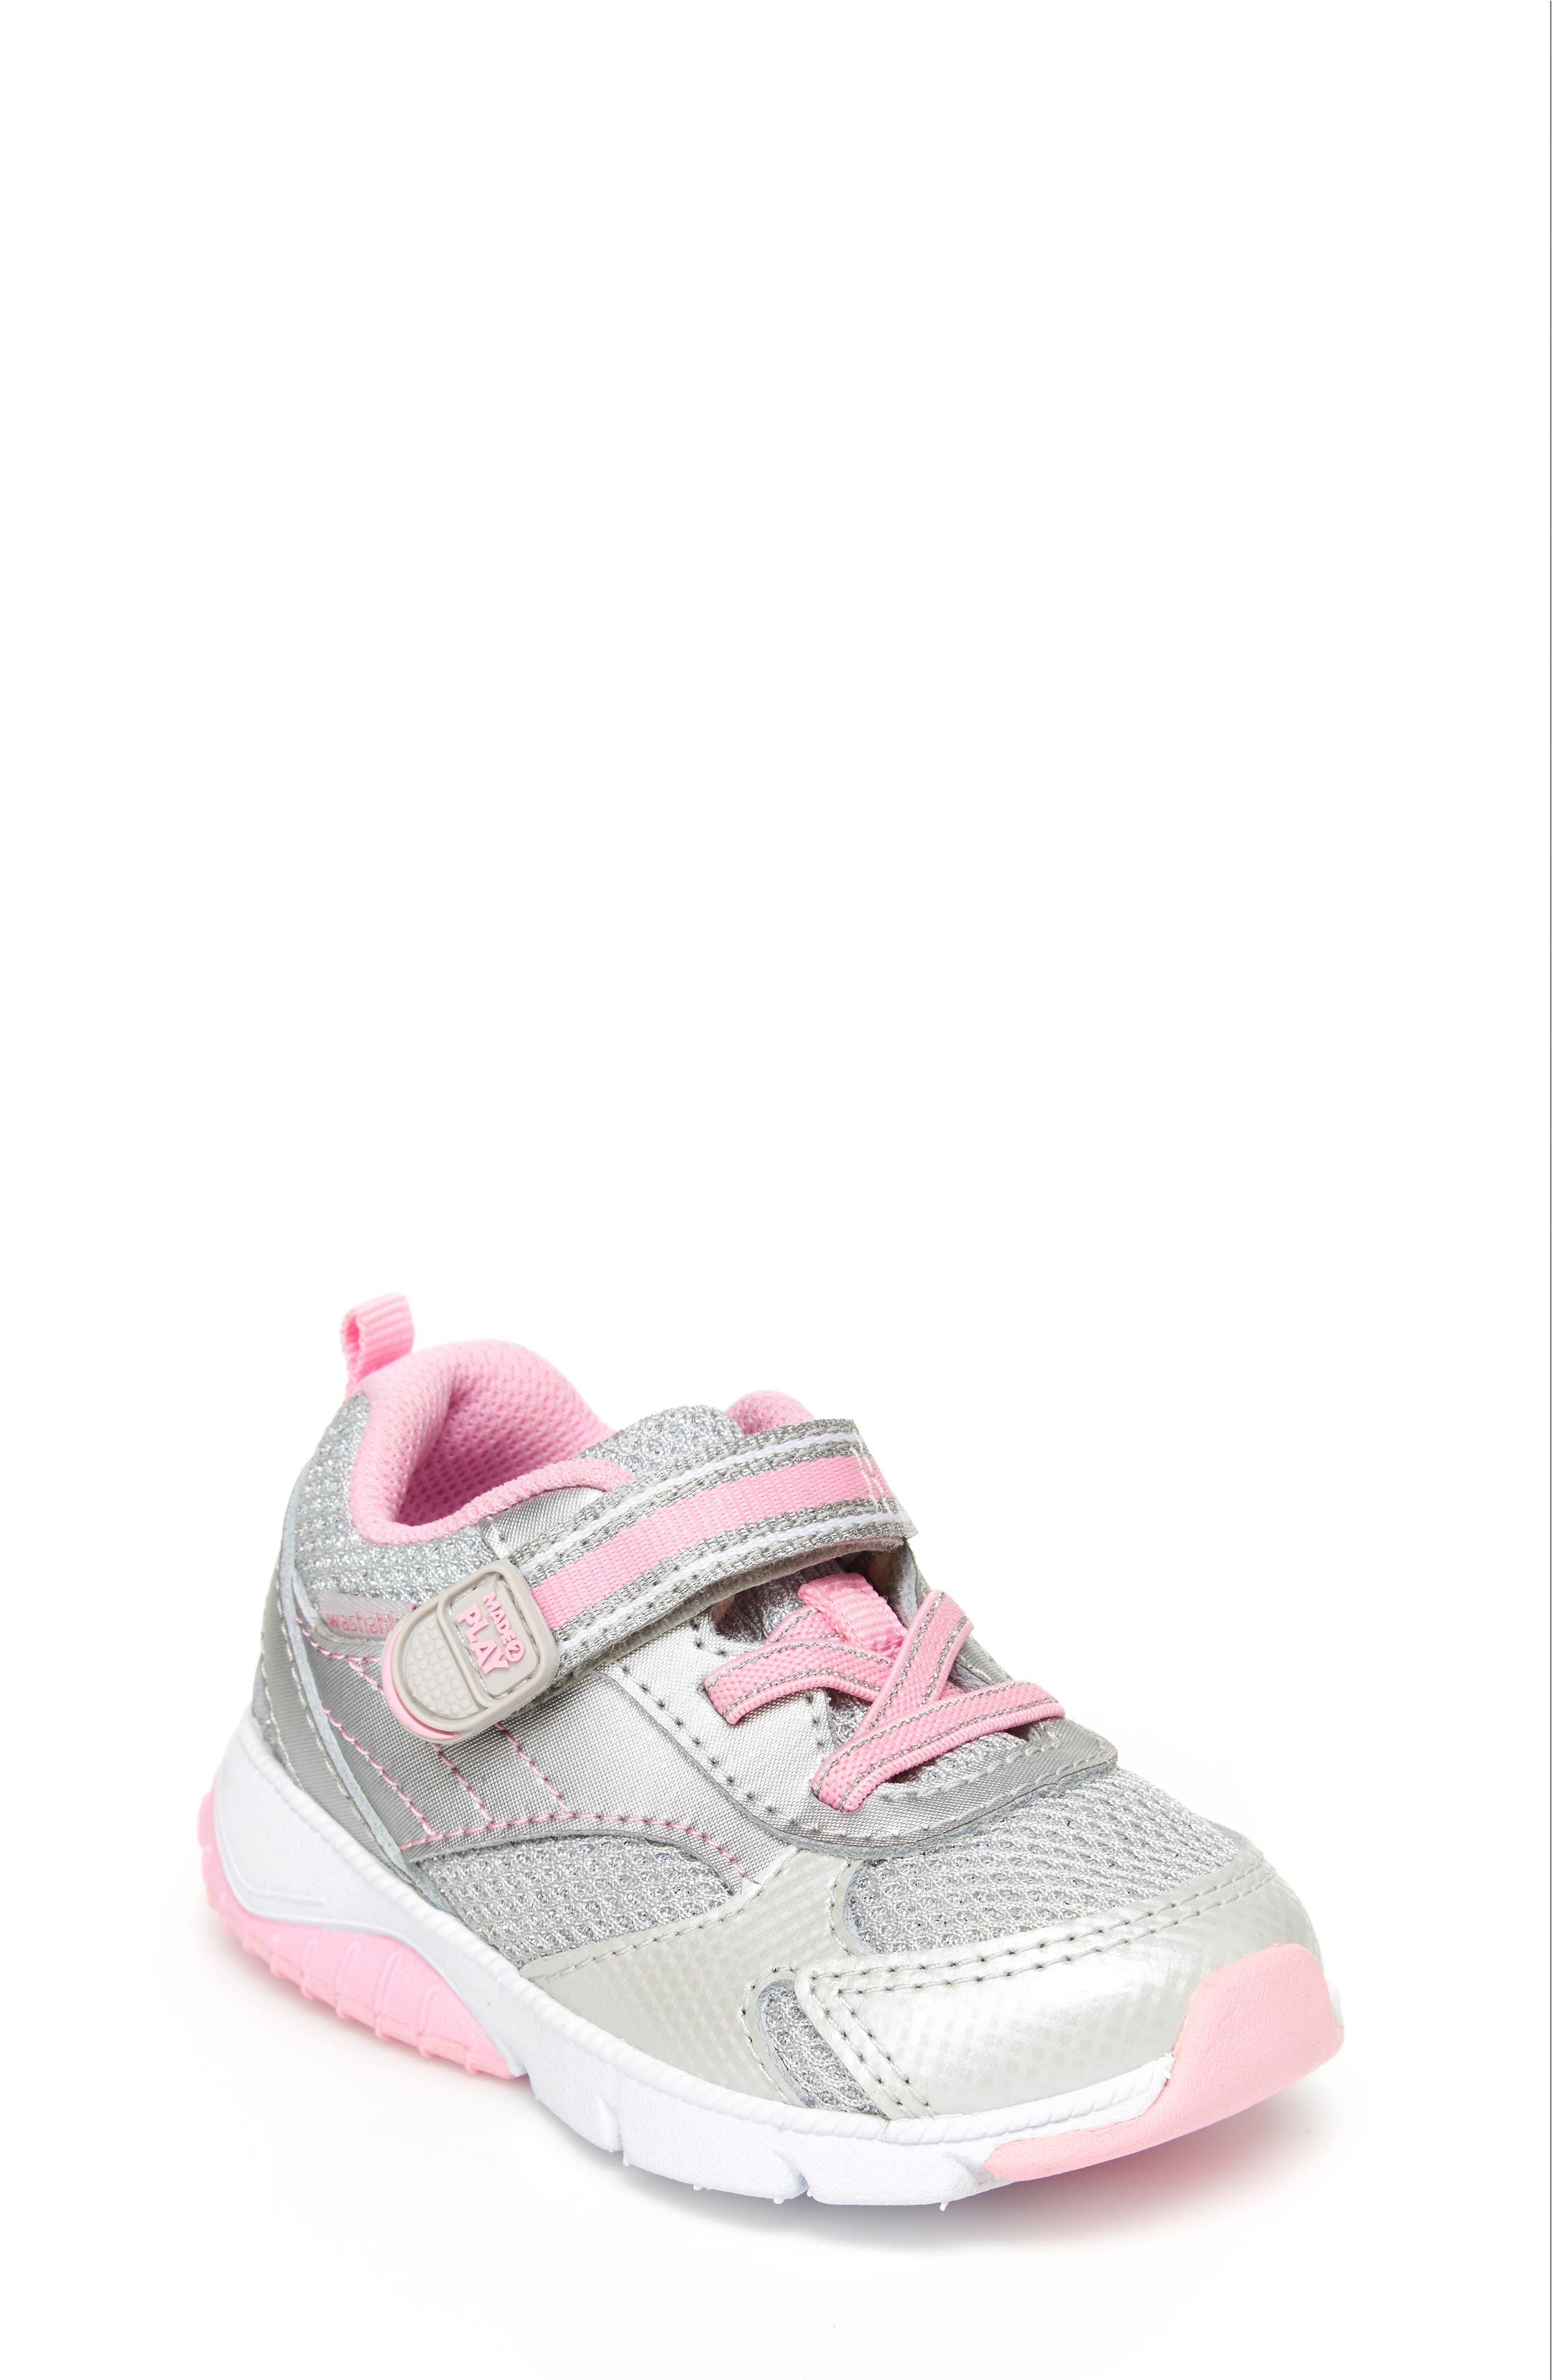 stride rite tennis shoes for toddlers